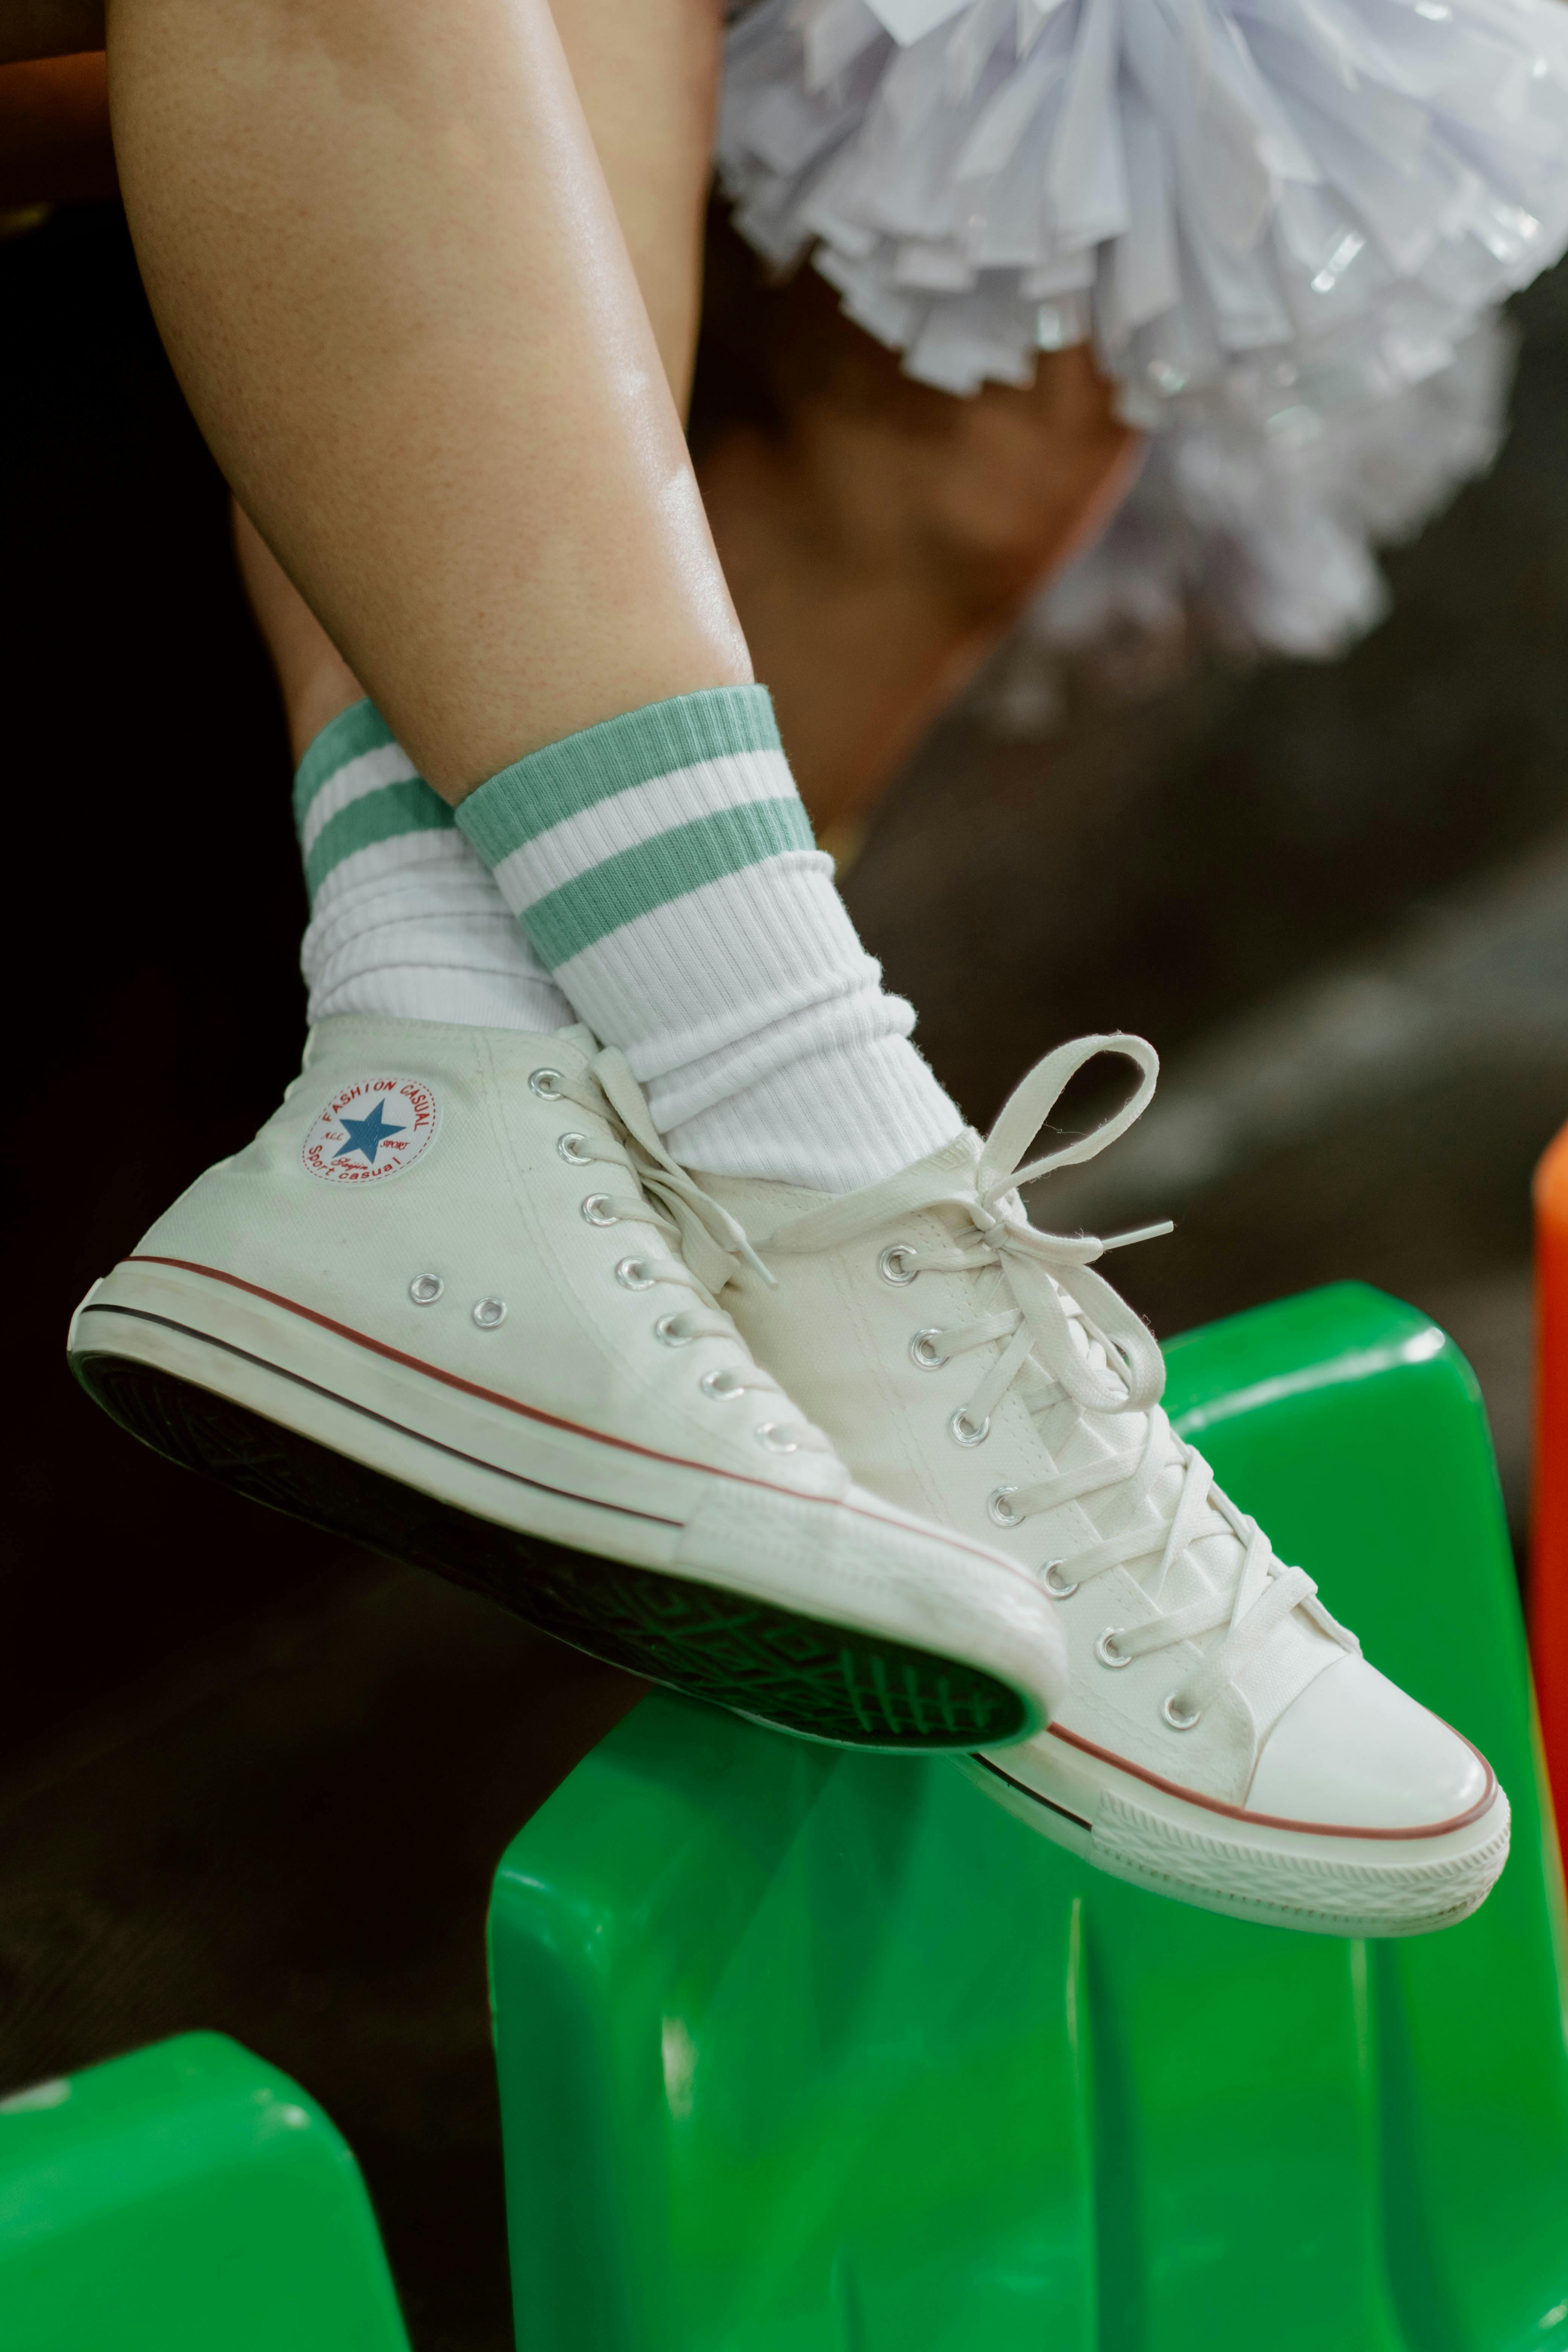 A Person Wearing Socks and Sneakers · Free Stock Photo